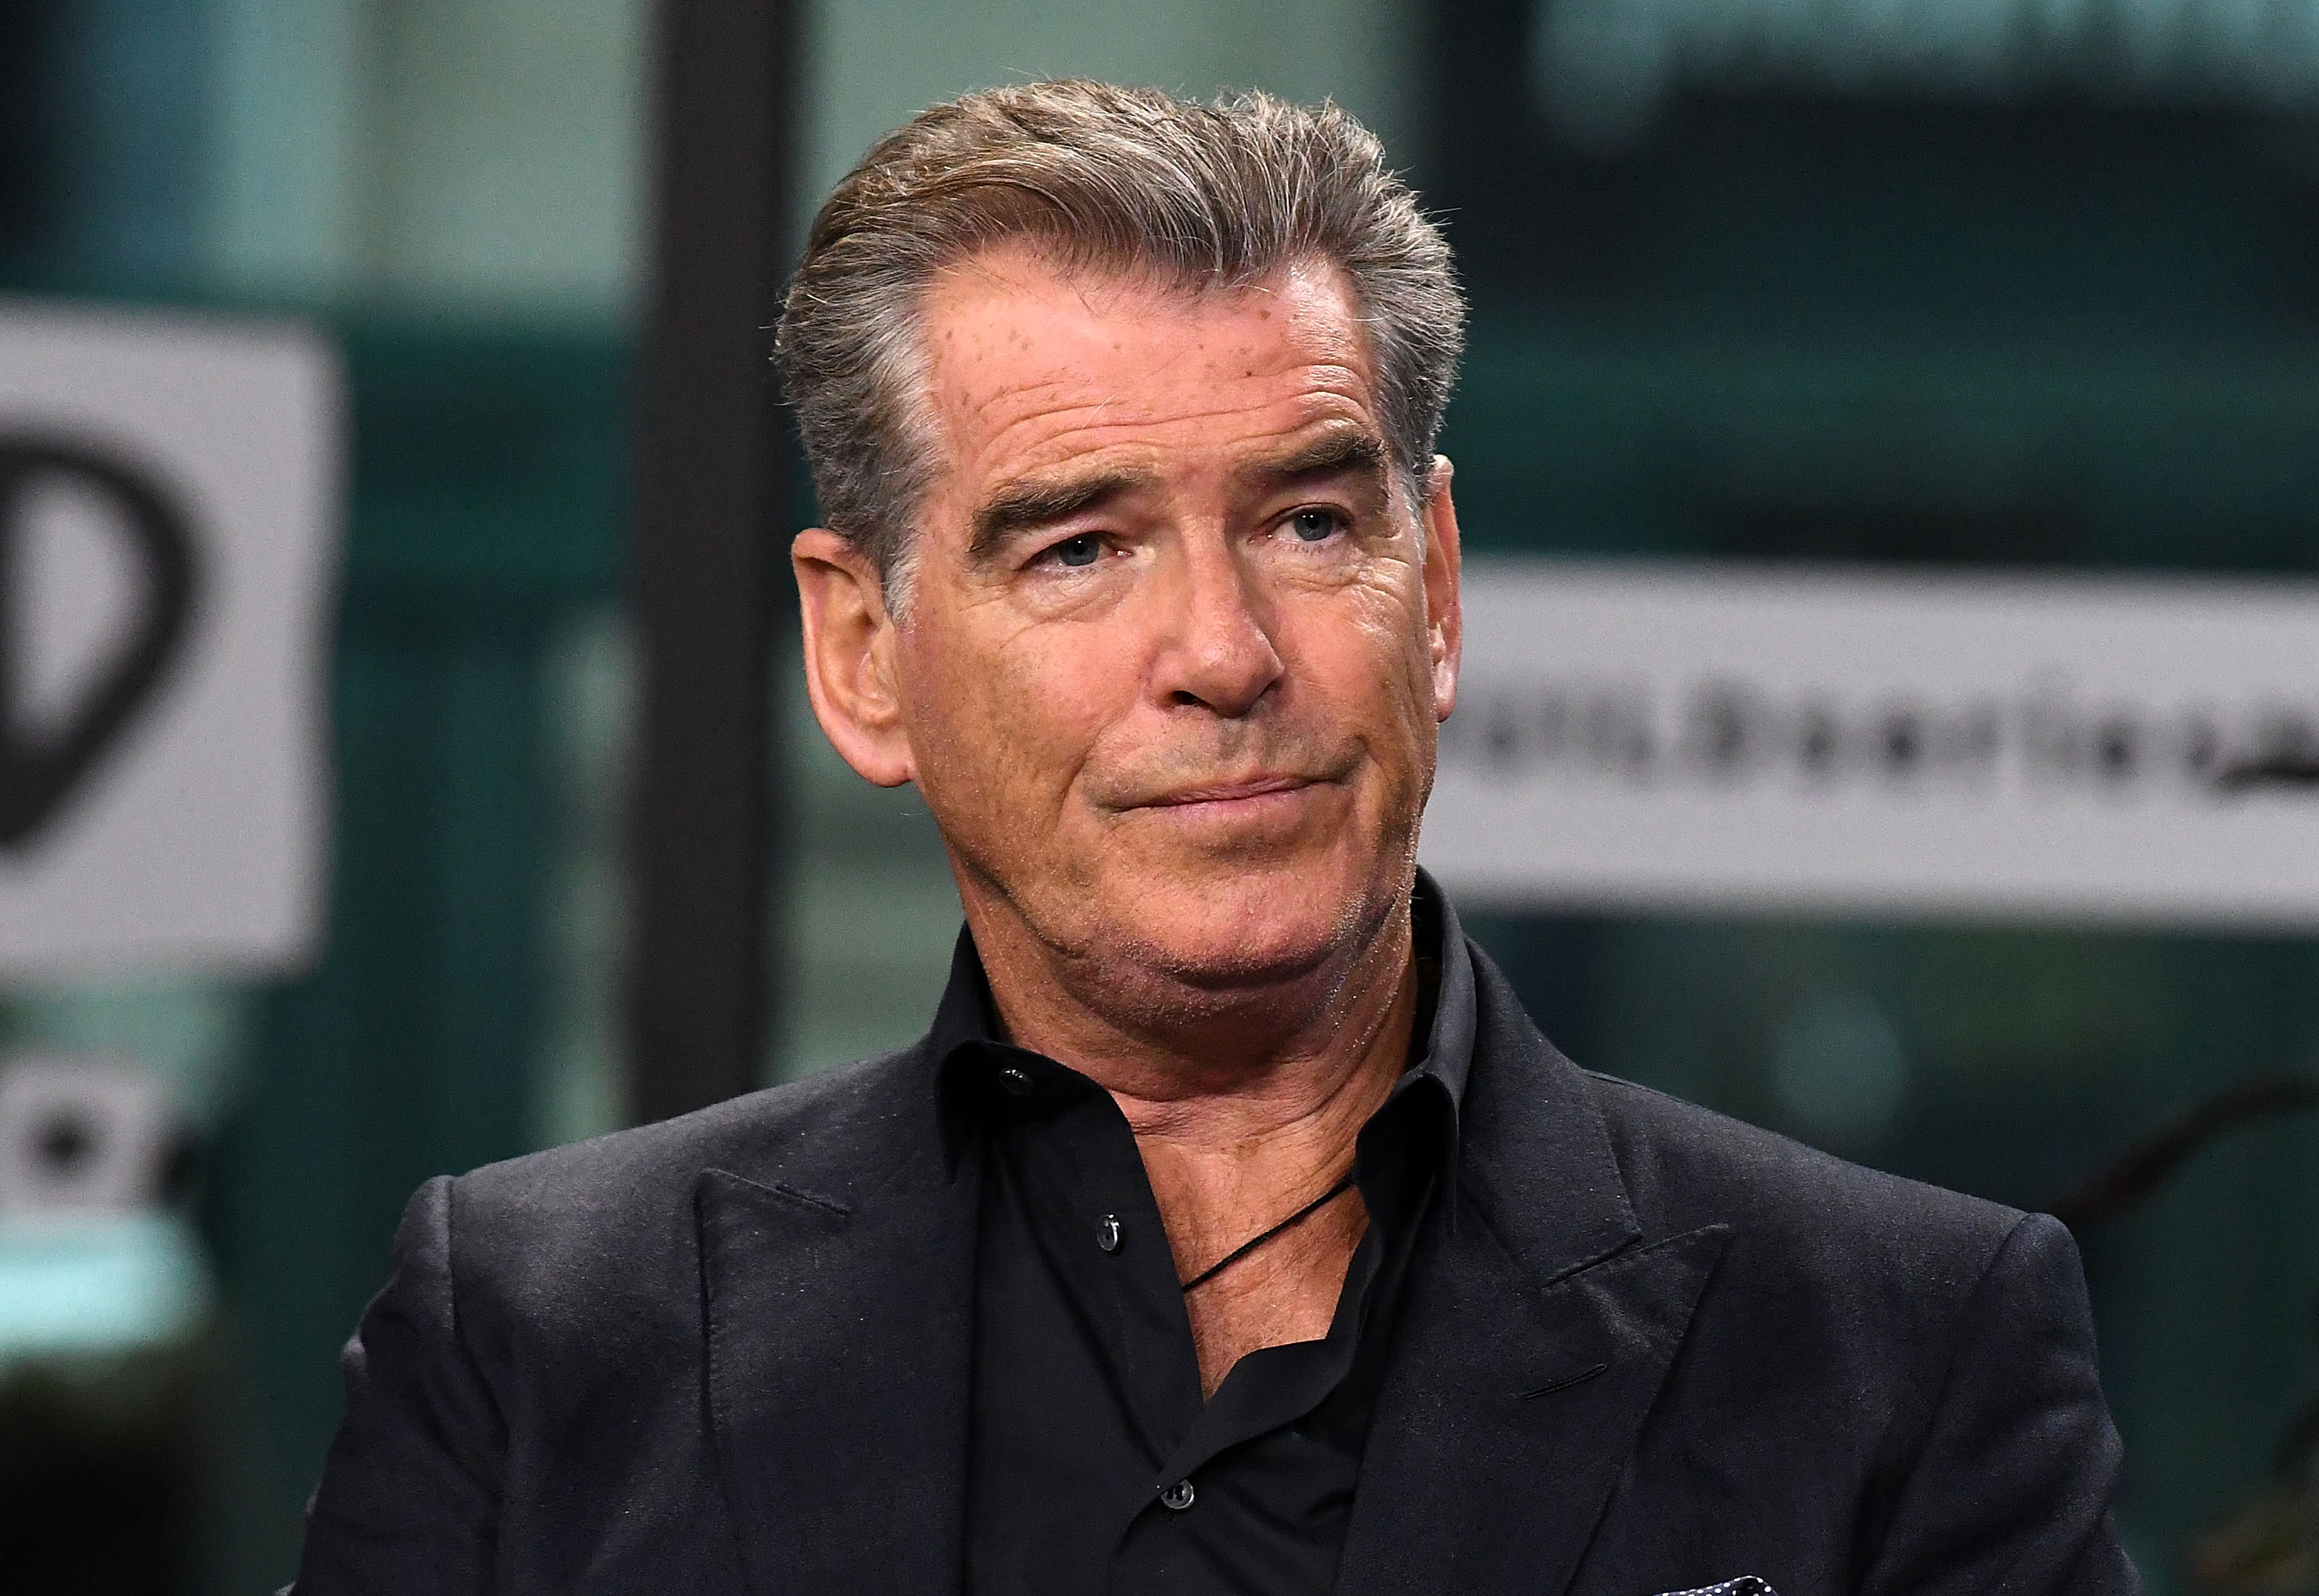 Pierce Brosnan at Build Series at Build Studio on April 6, 2017 in New York City. | Source: Getty Images